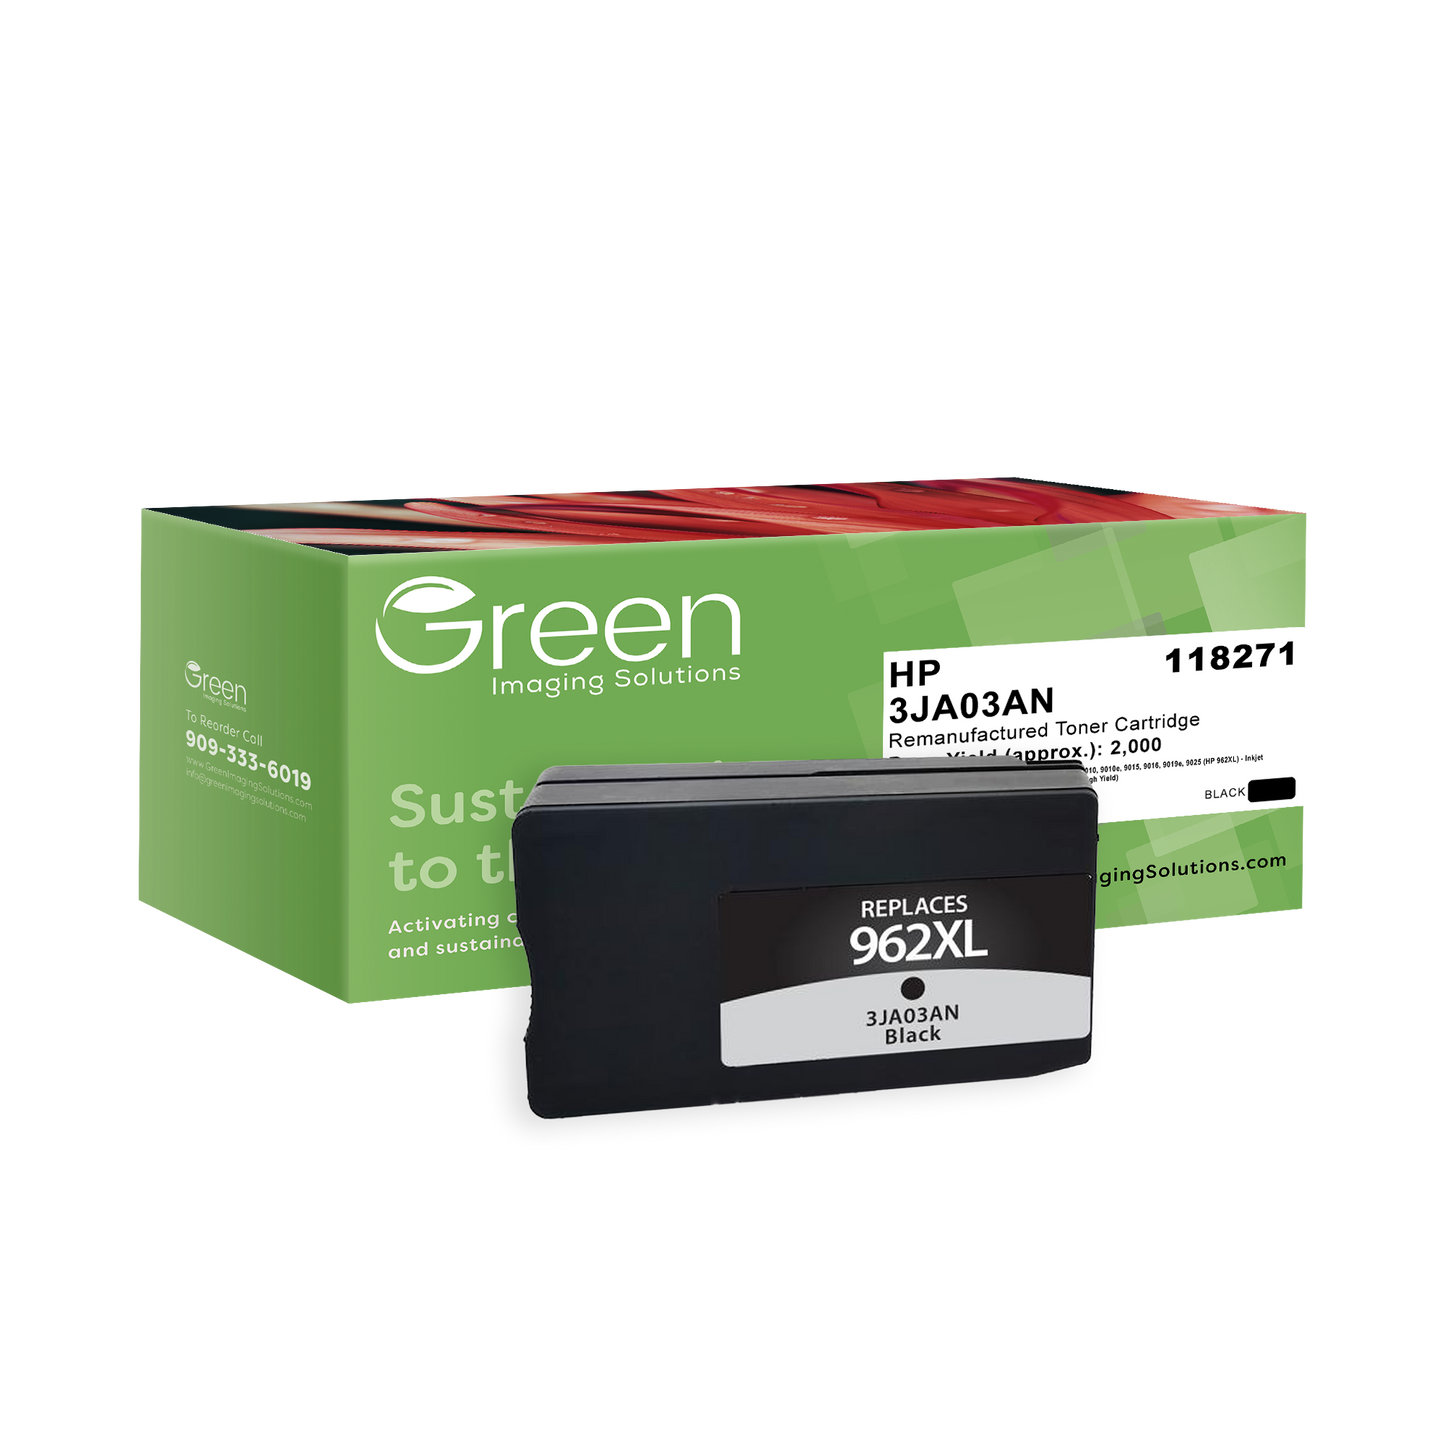 Green Imaging Solutions USA Remanufactured High Yield Black Ink Cartridge for HP 962XL (3JA03AN)